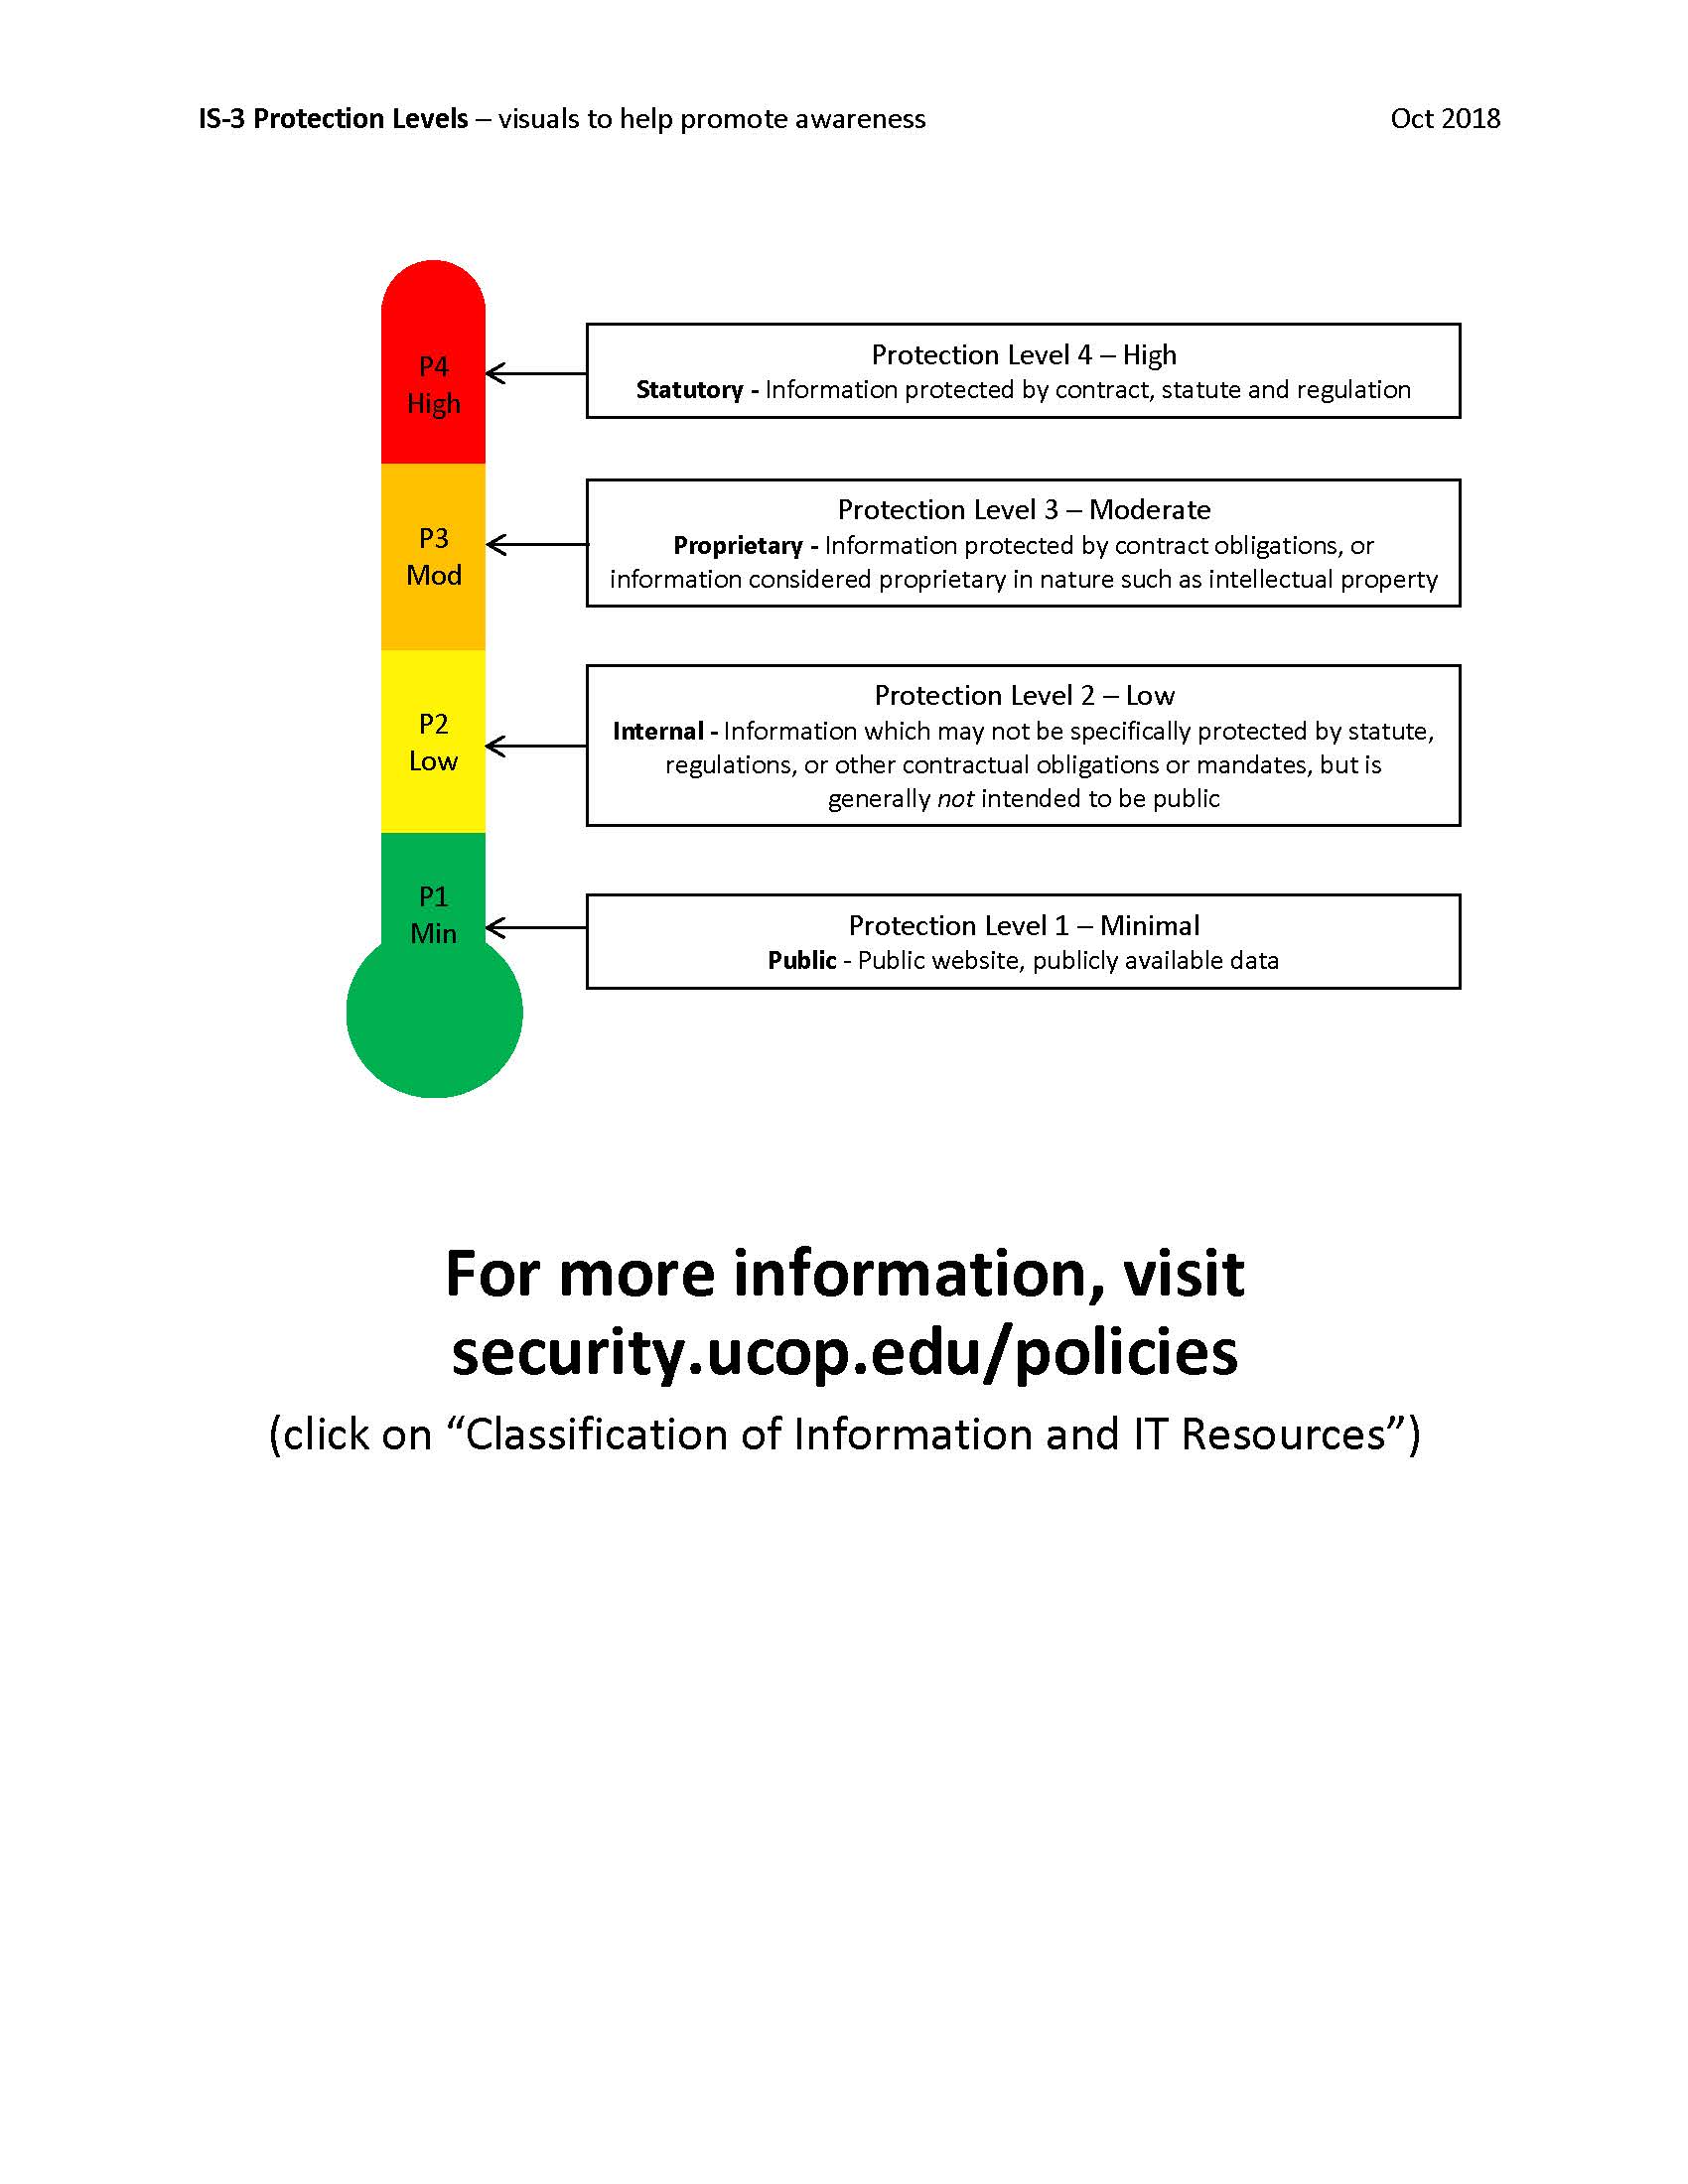 Image thumbnail: Visuals to help promote awareness of IS-3 protection levels, page 3 of 4.